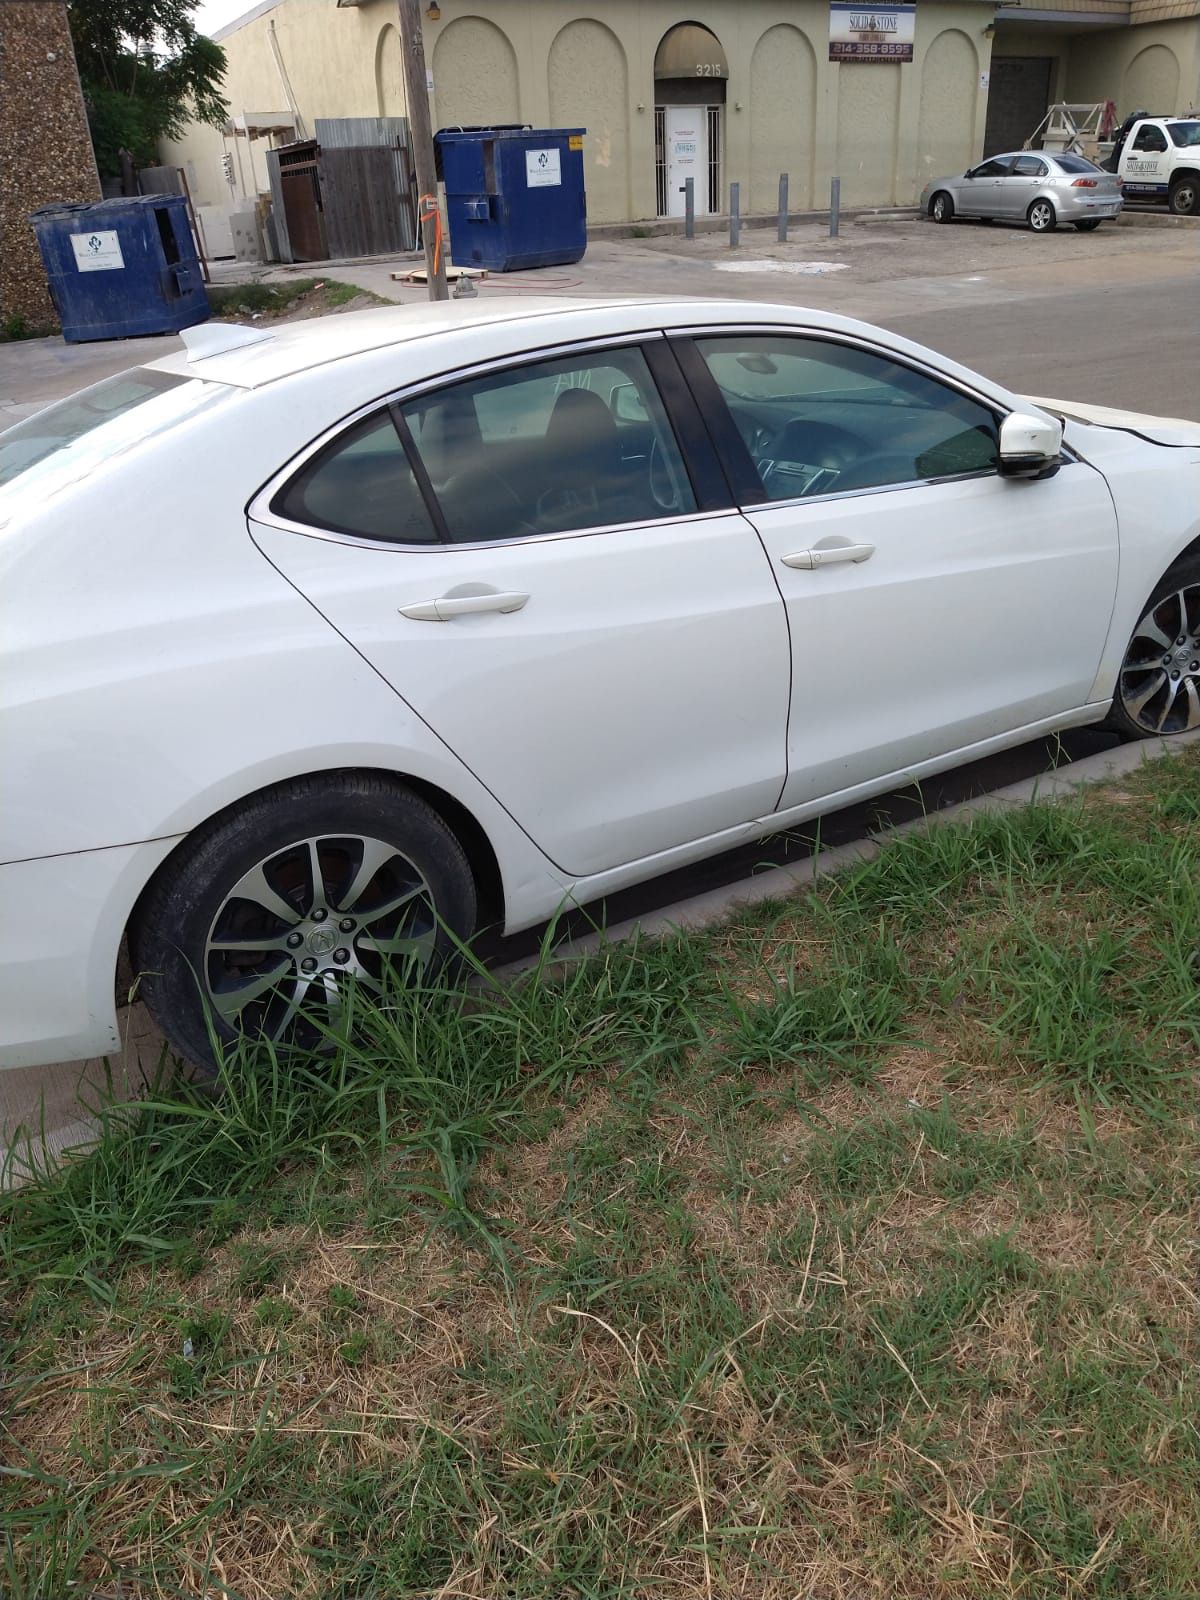 2015 Acura TLX for parts